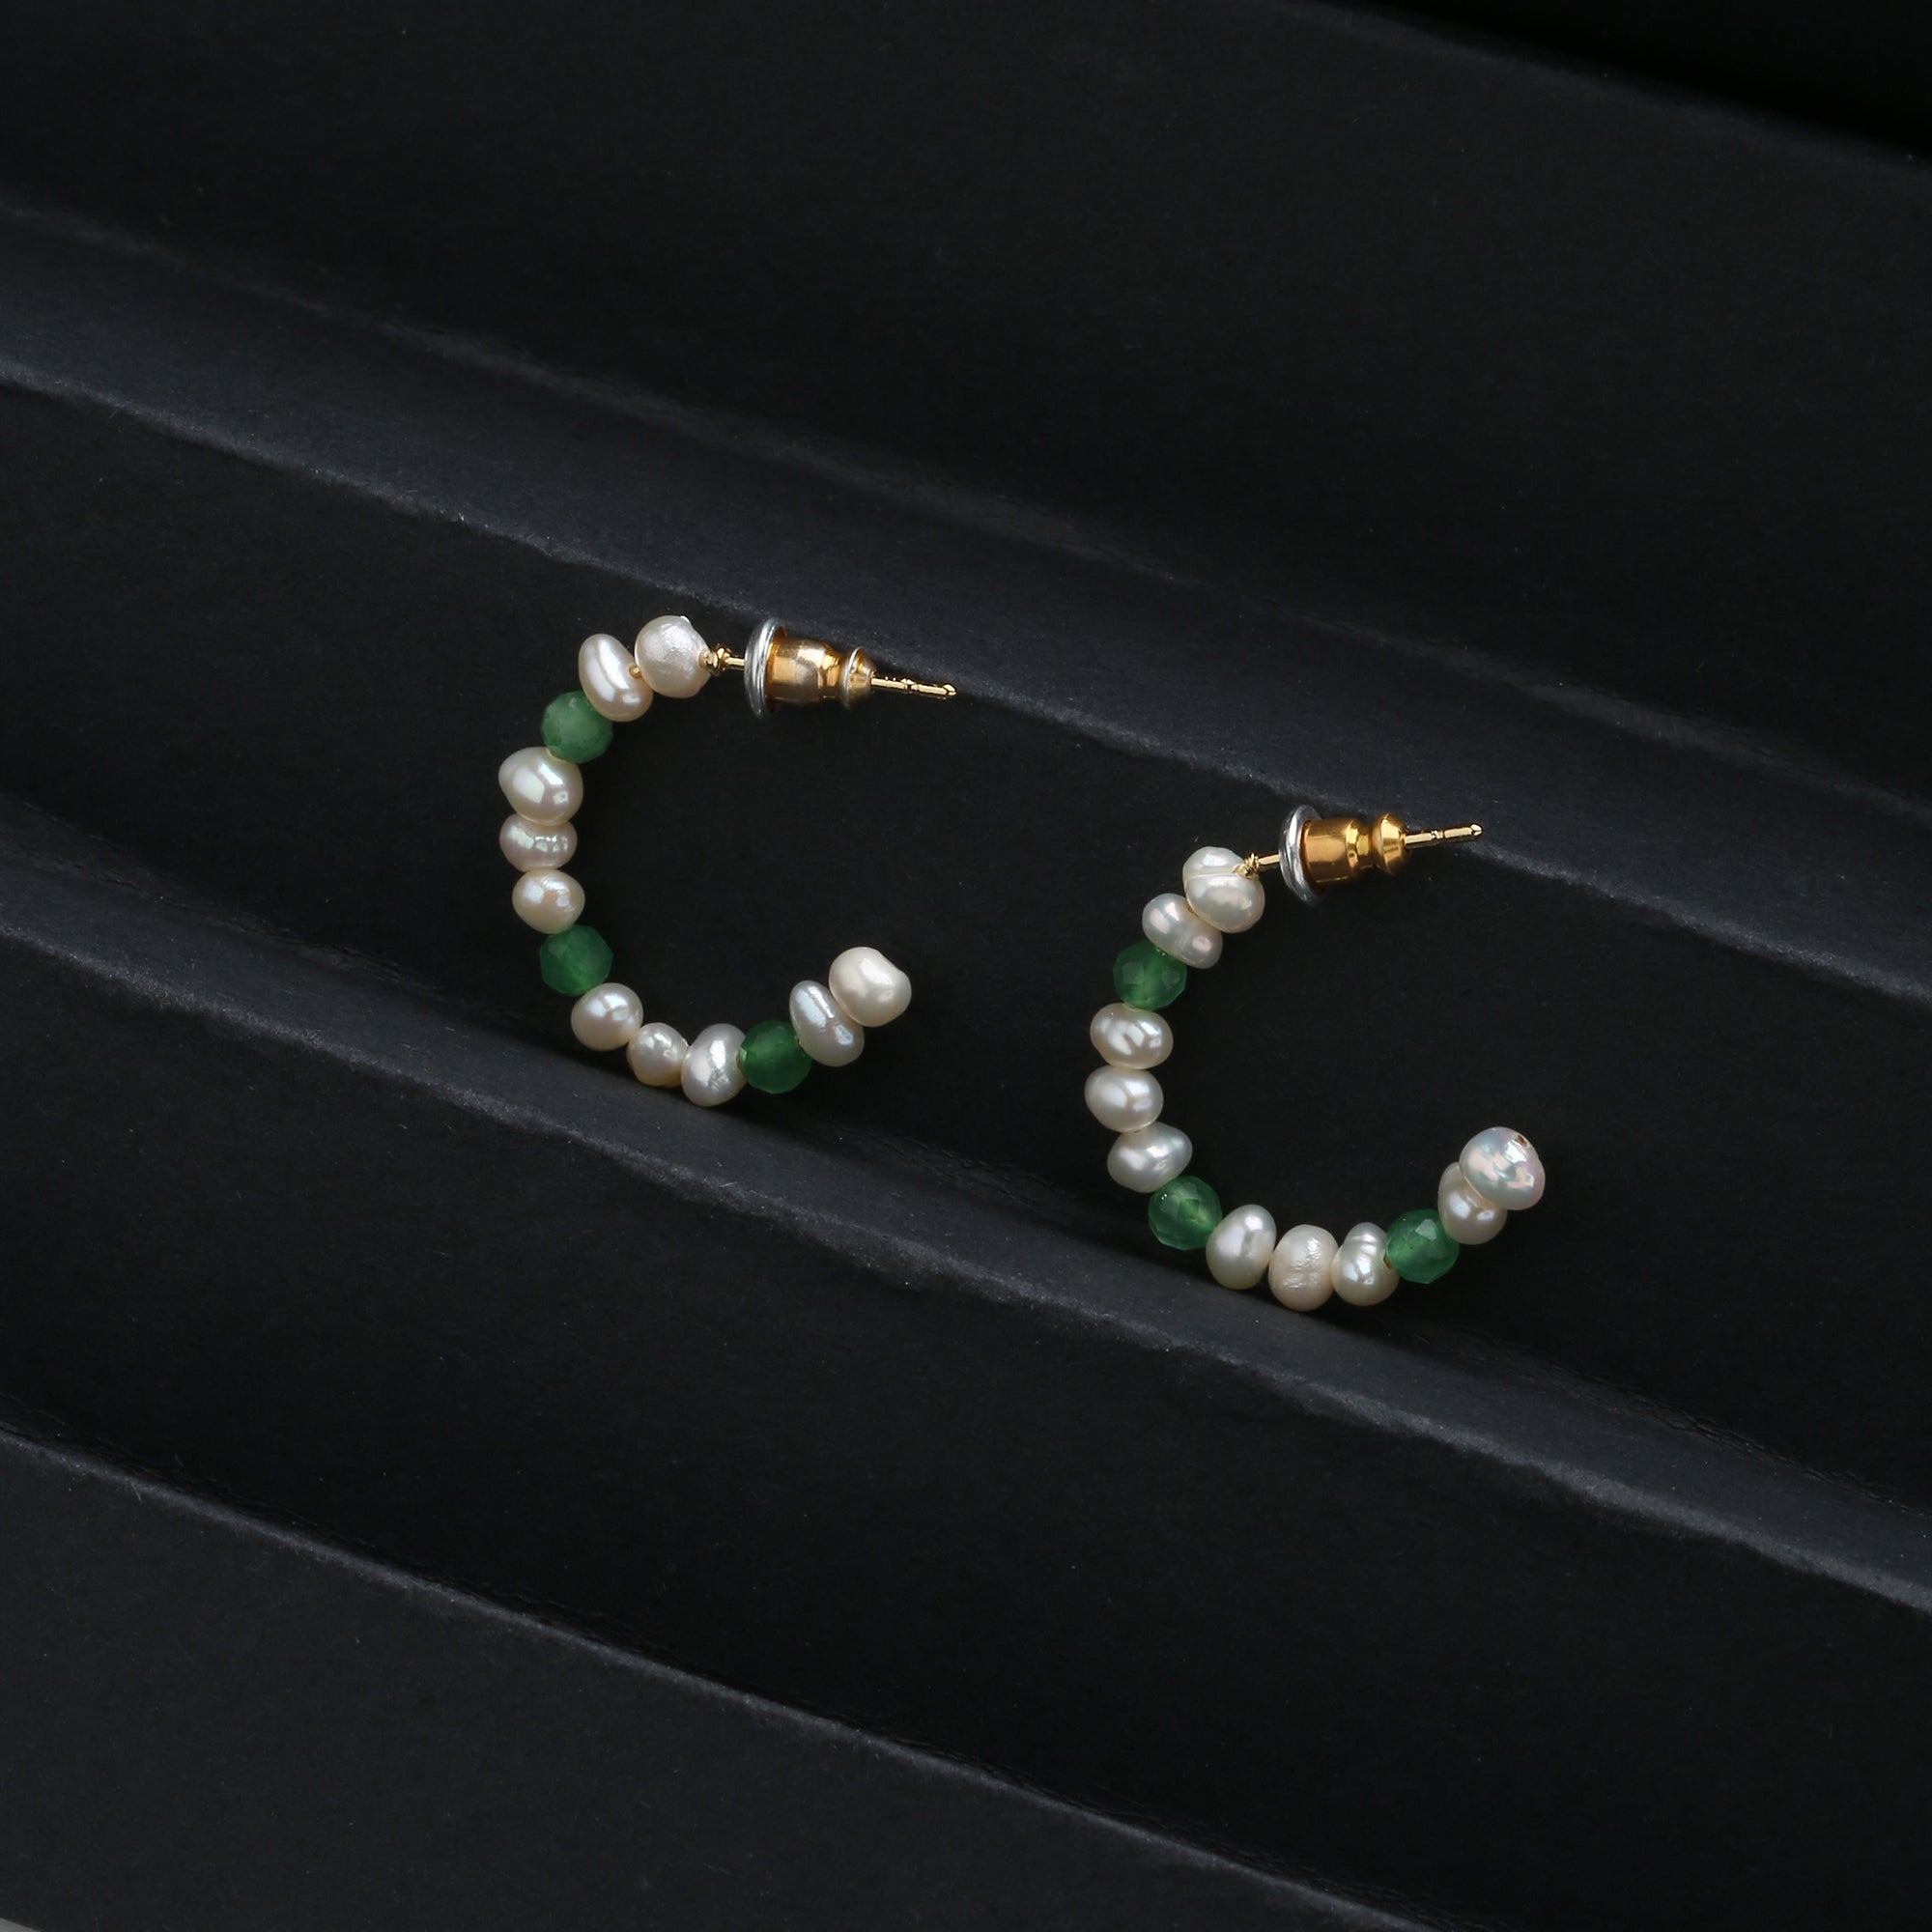 Real Gold Plated Pearl And Aventurine Hoop Earrings For Women By Accessorize London